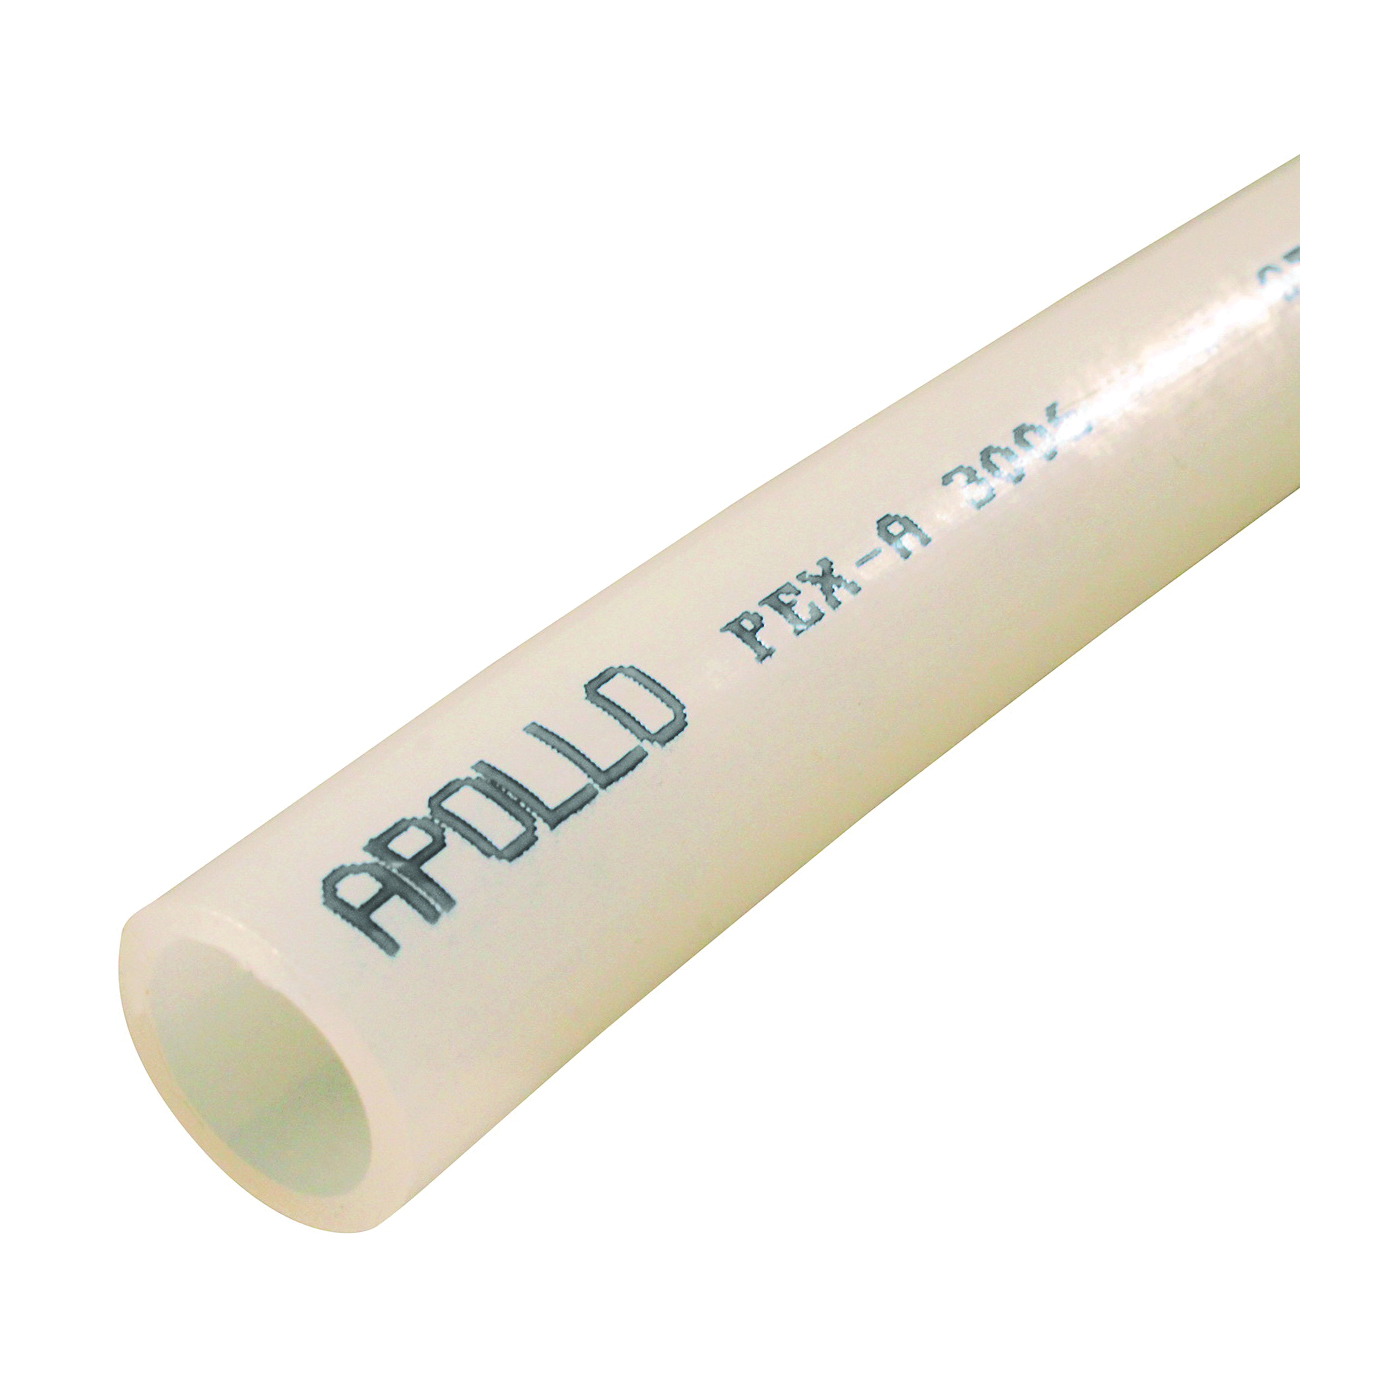 EPPW51 PEX-A Pipe Tubing, 1 in, Opaque, 5 ft L